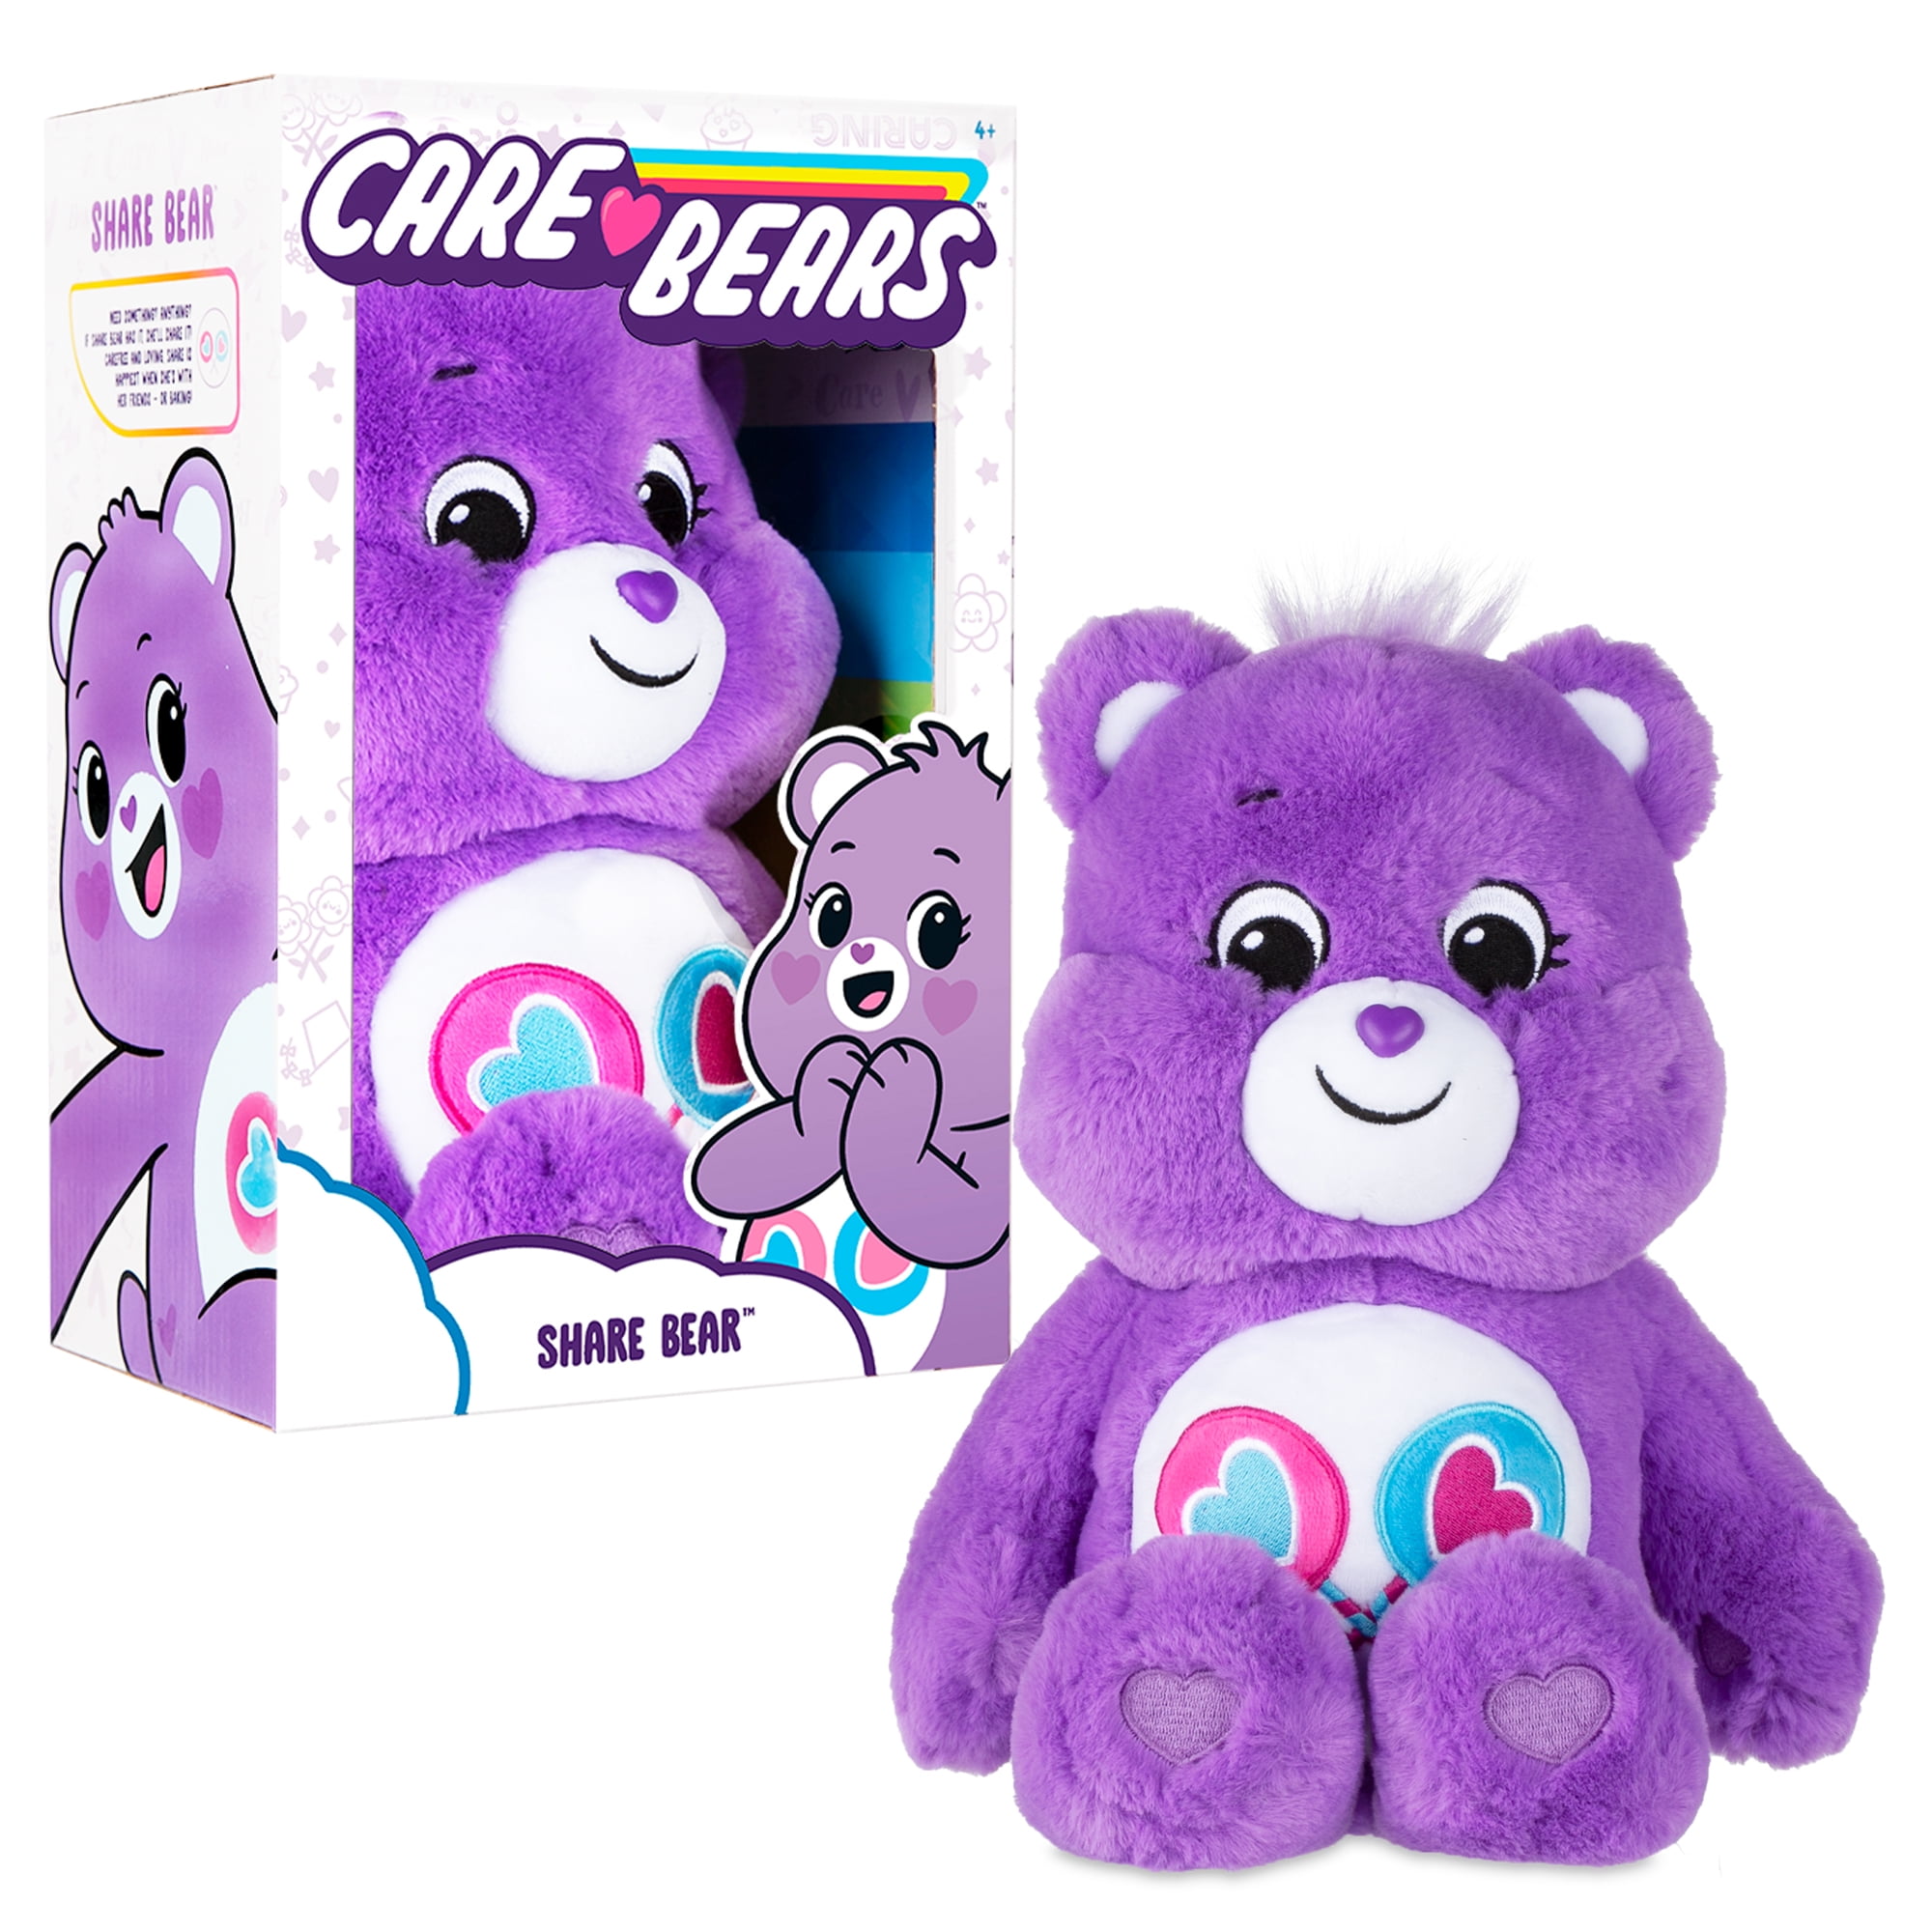 Cheer Bear Details about   NEW 2020 Care Bears 14" Plush Soft Huggable Material-PINK 